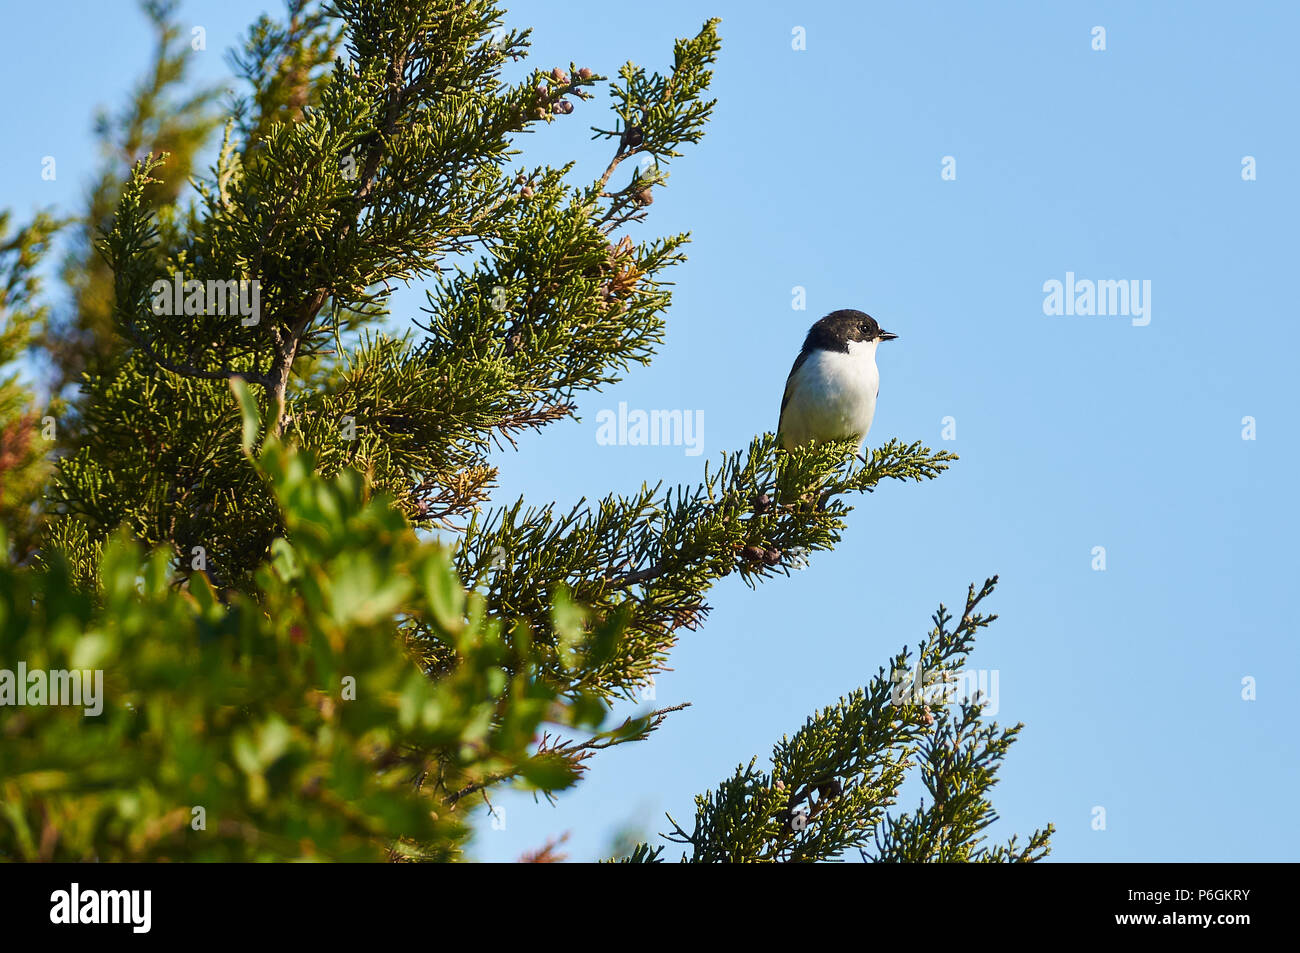 European pied flycatcher (Ficedula hypoleuca) over a Juniperus branch in Can Marroig in Ses Salines Natural Park (Formentera, Balearic islands, Spain) Stock Photo